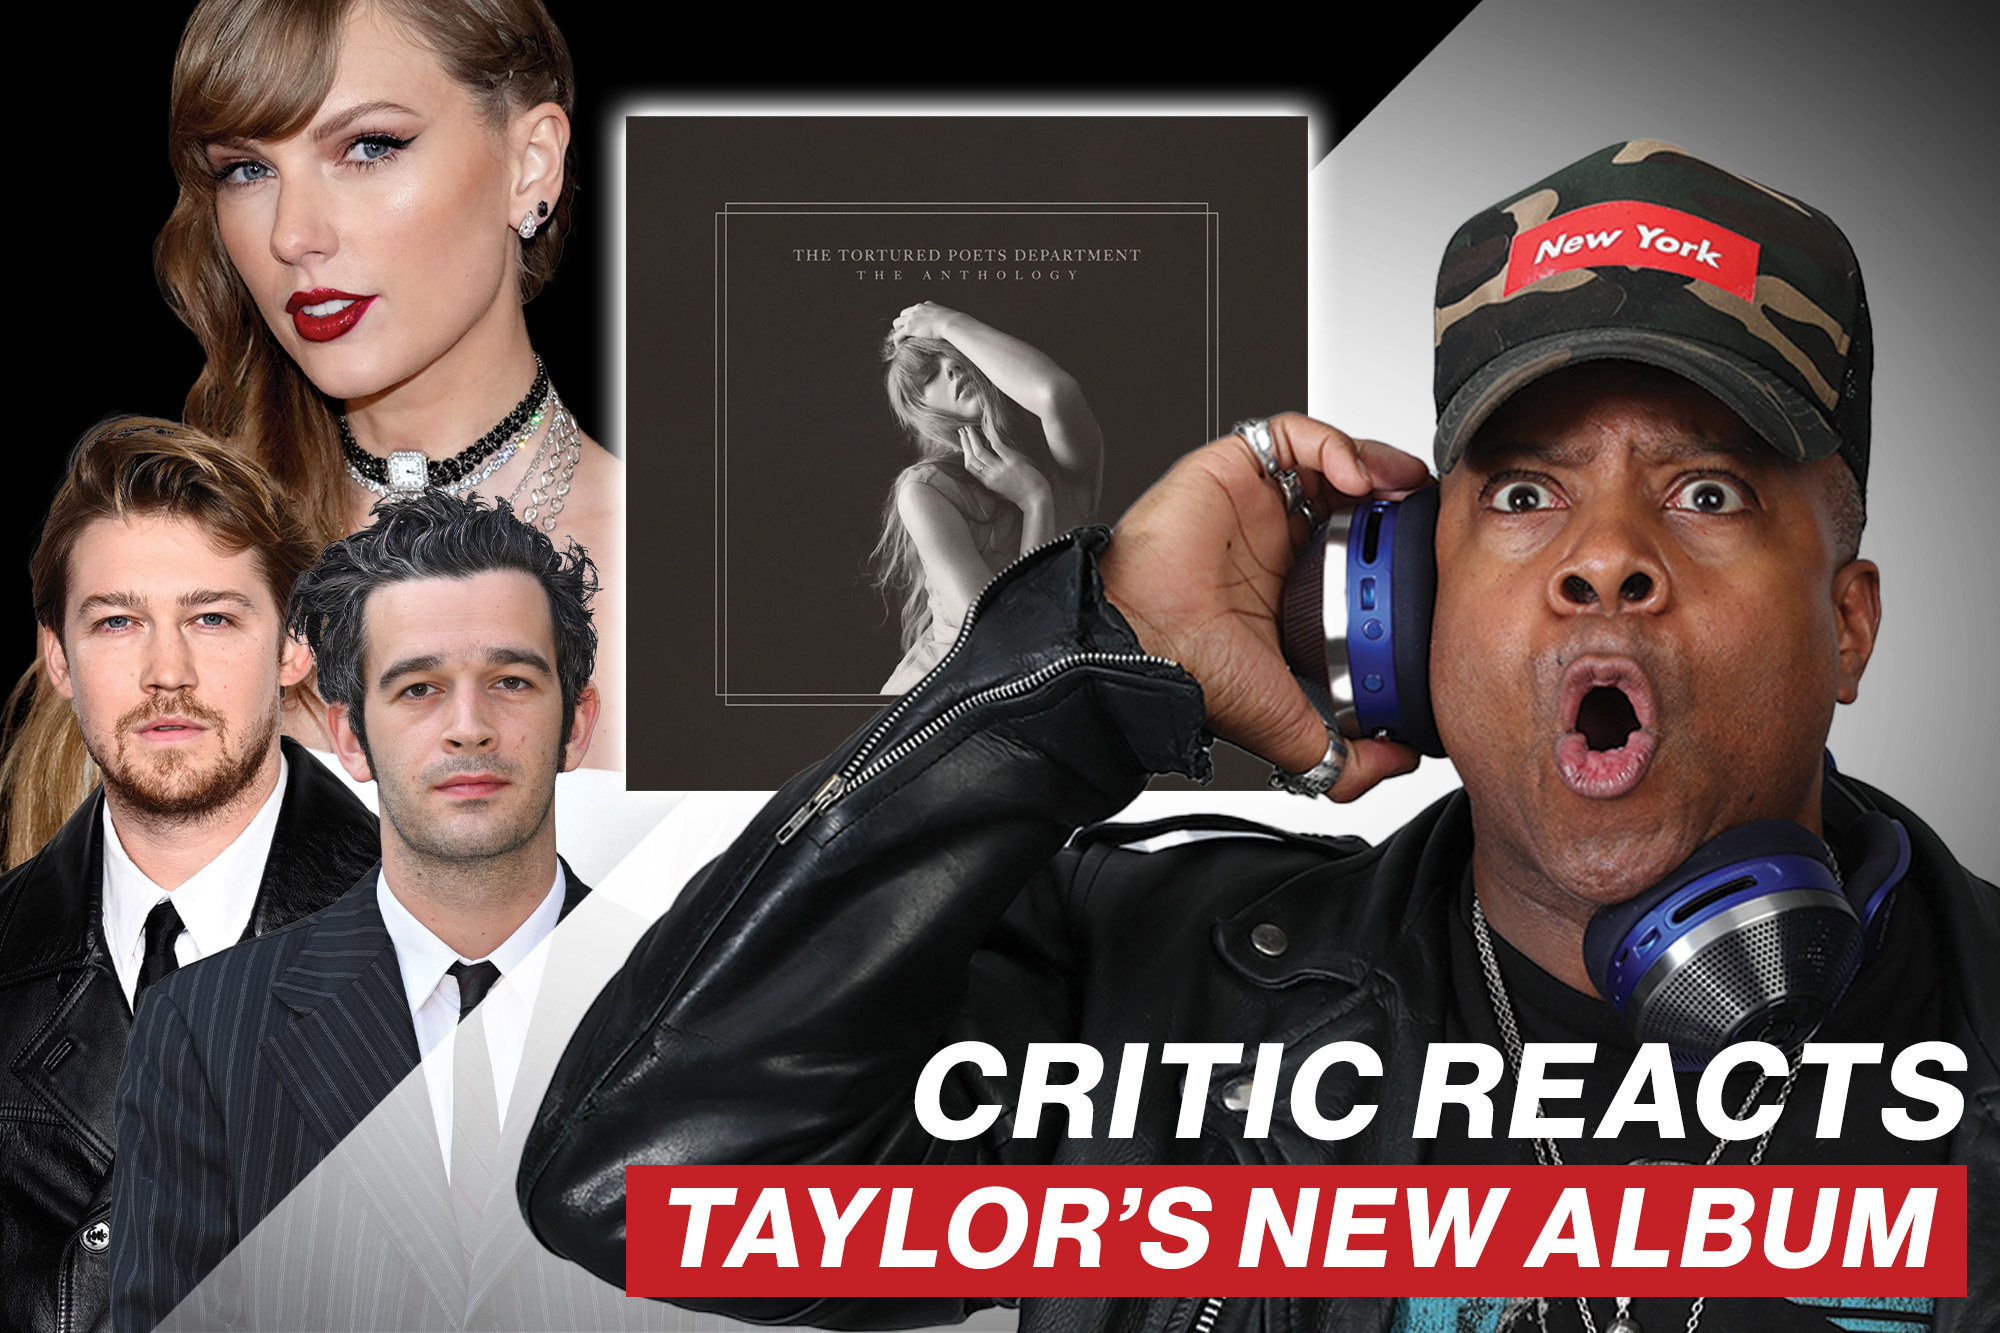 Breaking down Taylor Swift’s The Tortured Poets Department double album: FULL REVIEW/REACTION